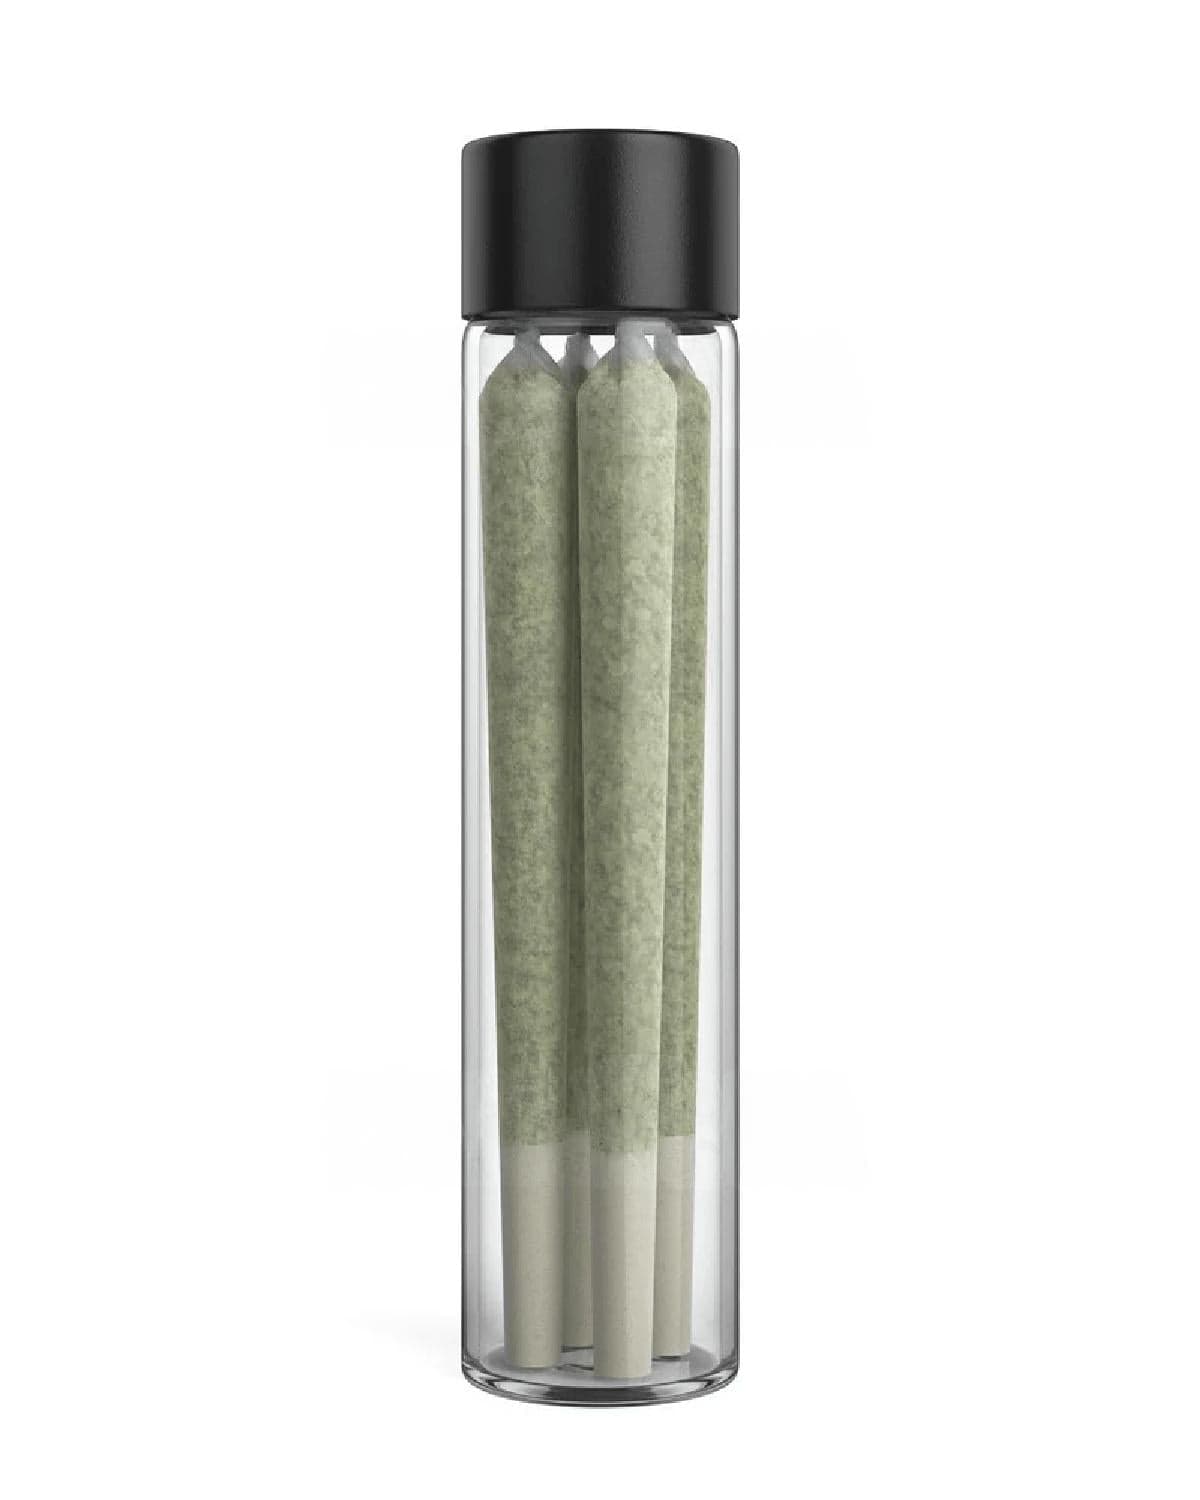 Glass Wide Body Child Resistant Pre-Roll Tube | 120 mm